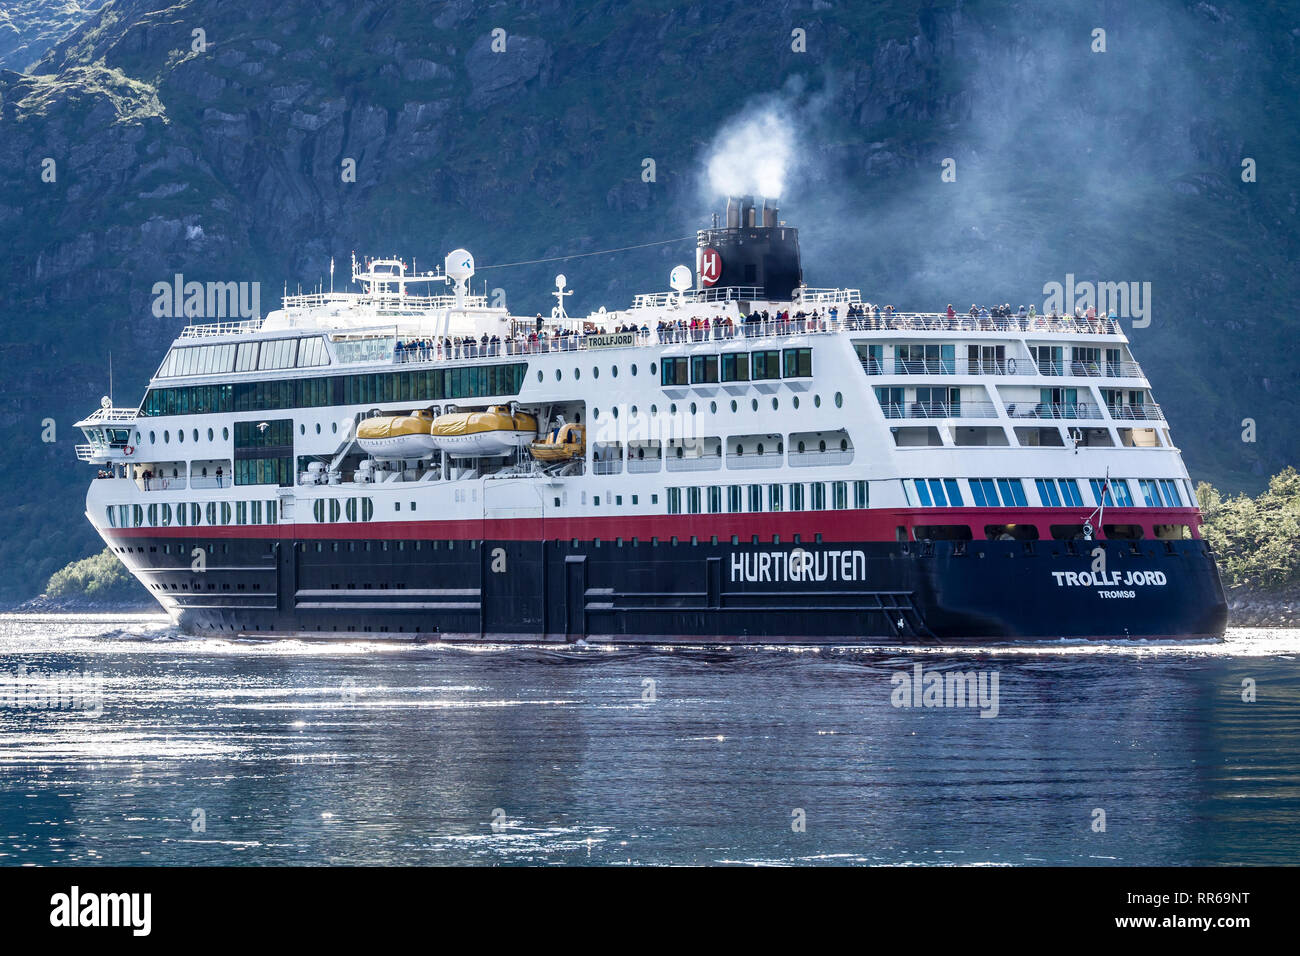 Hurtigruten cruise ship 'Trollfjord' passing the Raftsund, the strait between islands  Hinnøya and Austvågøya, surrounded by steep mountains, Norway Stock Photo